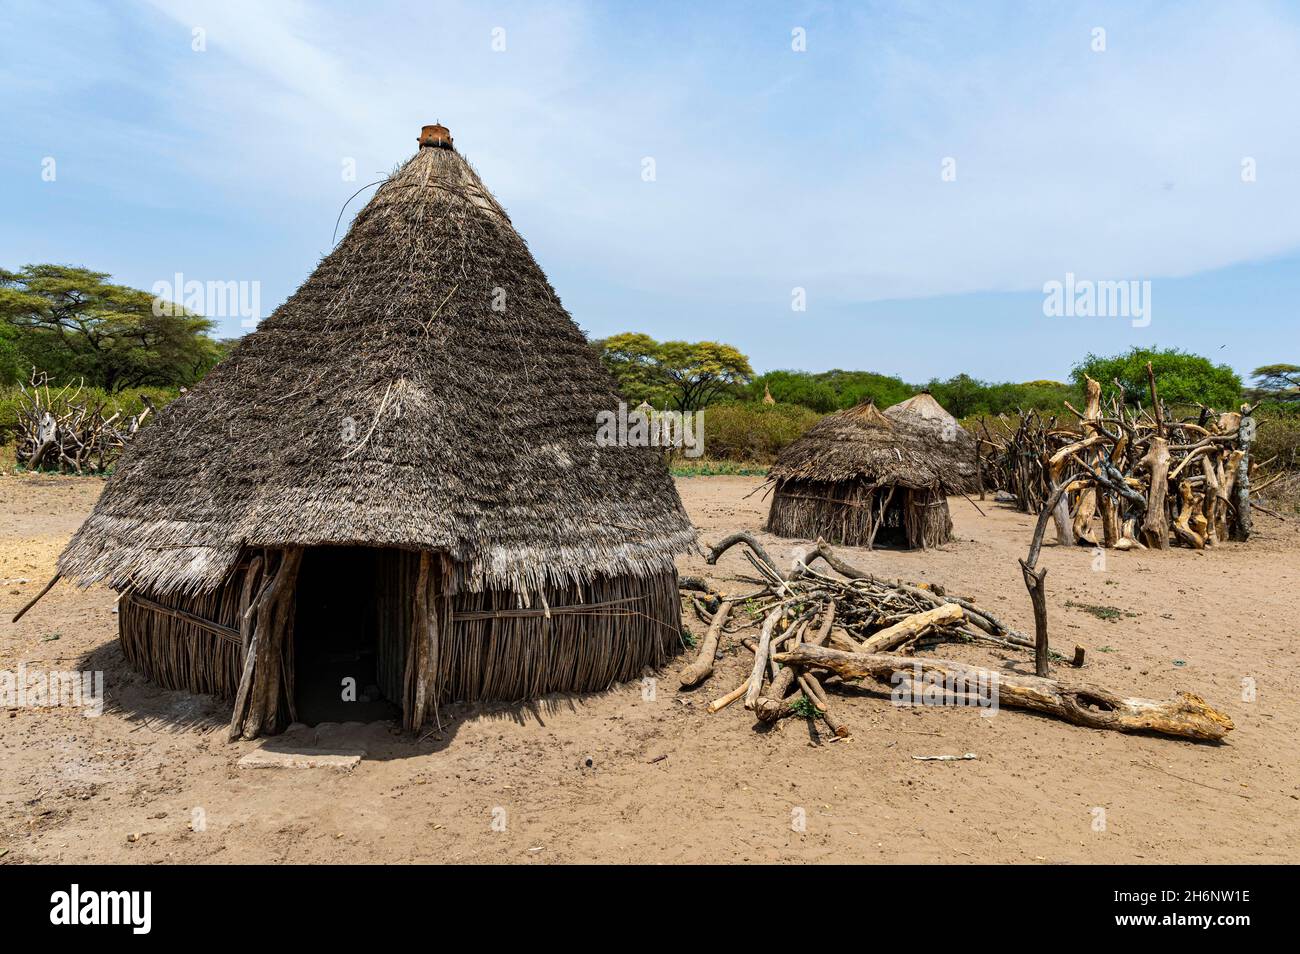 Traditional build huts of the Toposa tribe, Eastern Equatoria, South Sudan Stock Photo